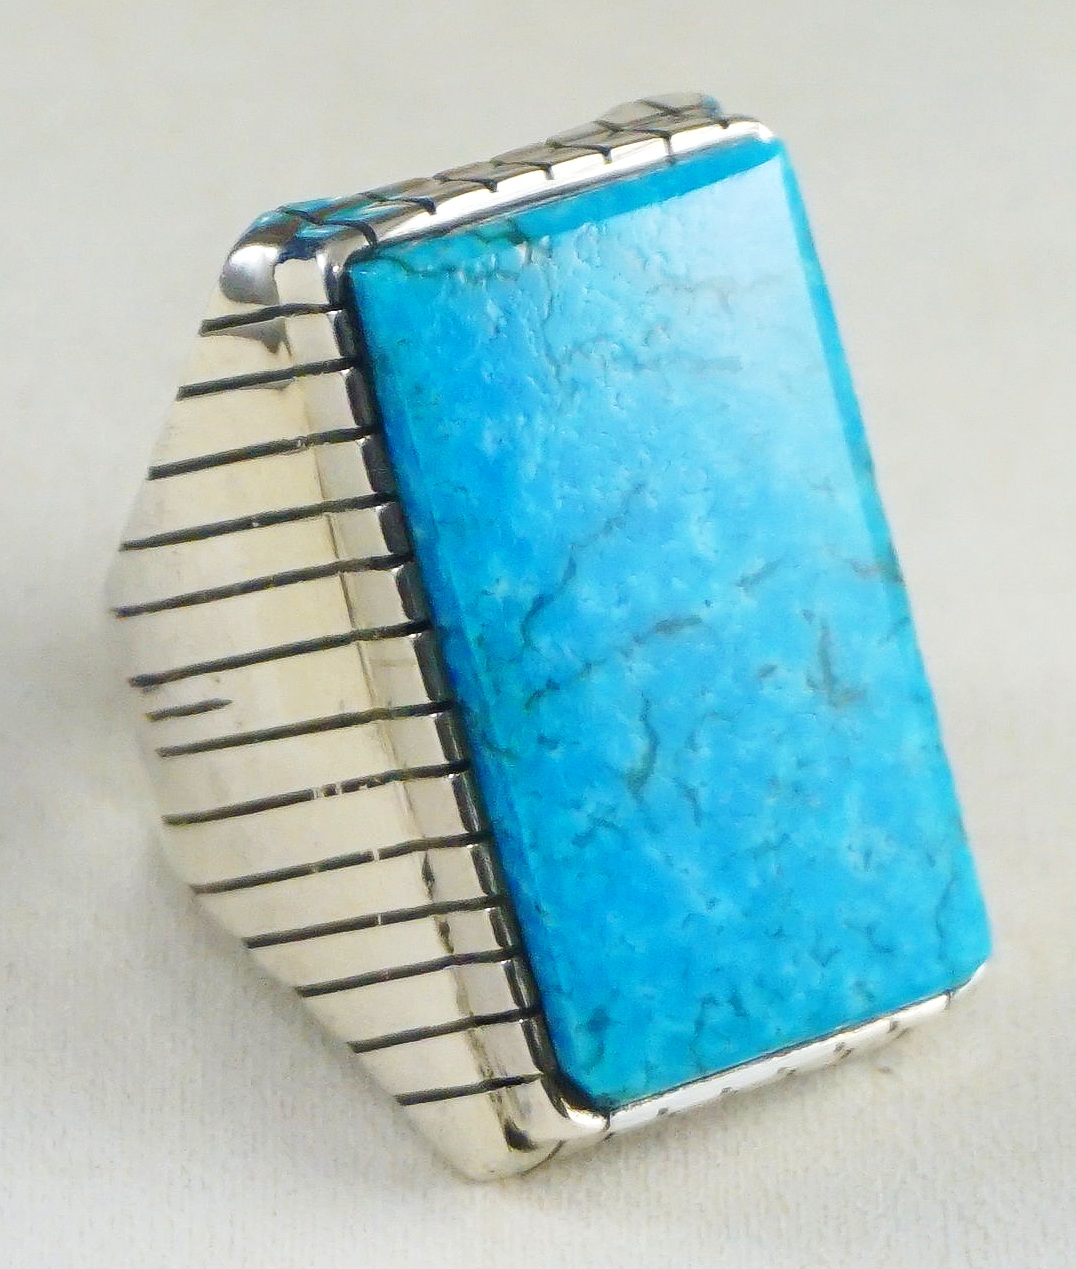 Mens Turquoise Ring Turquoise Ring Royston Turquoise Ring Womens Turquoise Ring Mens Square Ring Square Turquoise Ring, Size 7